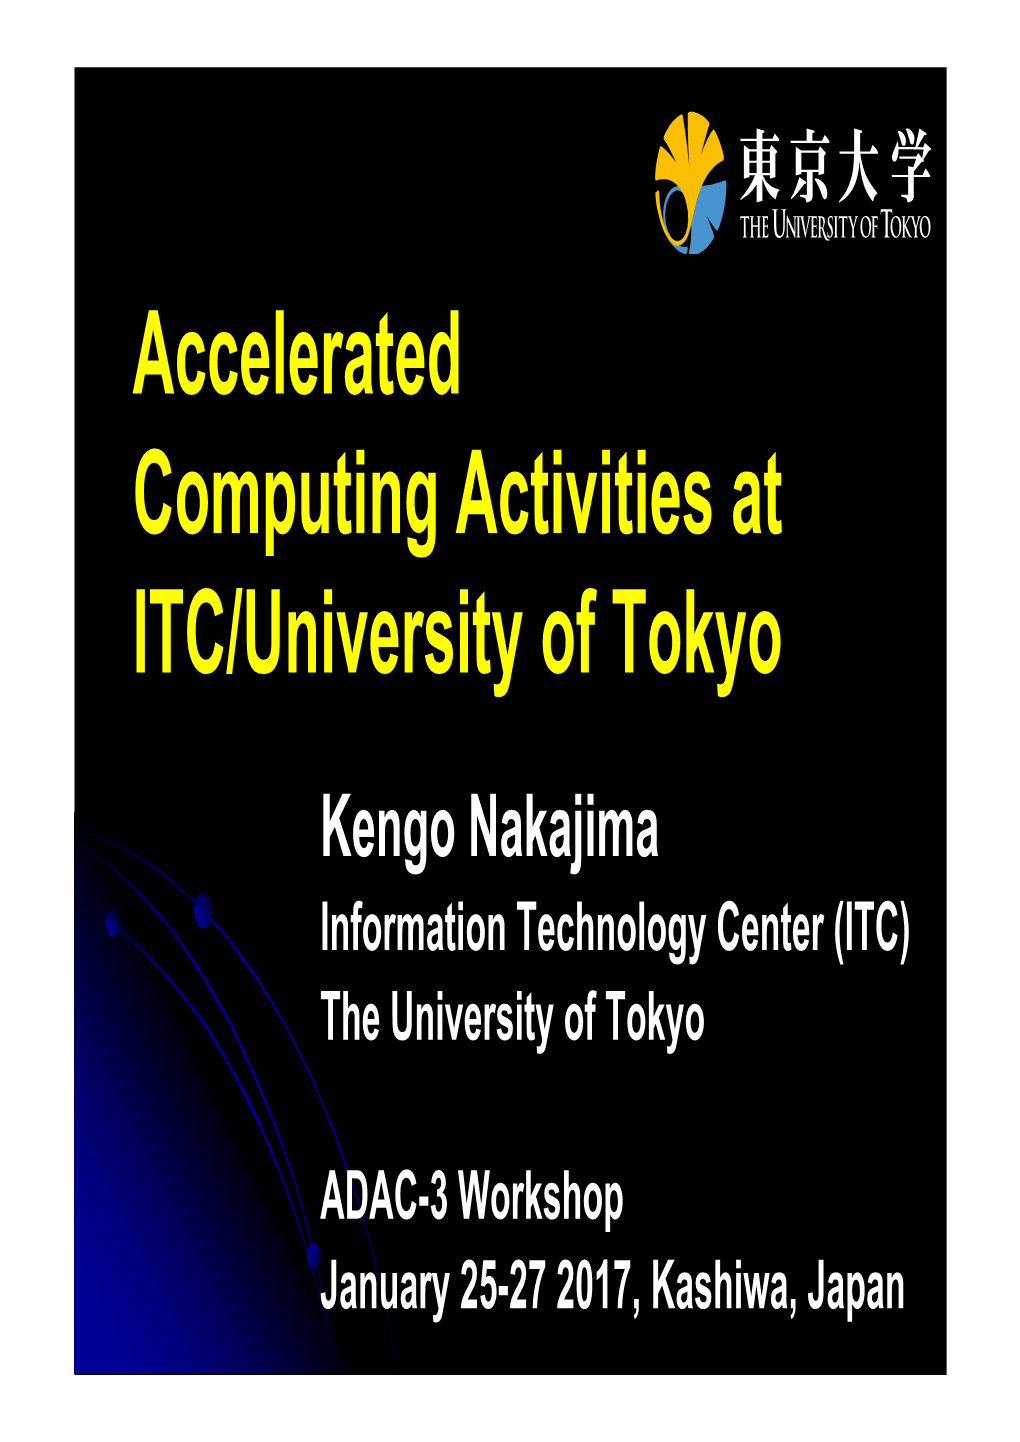 Accelerated Computing Activities at ITC/University of Tokyo